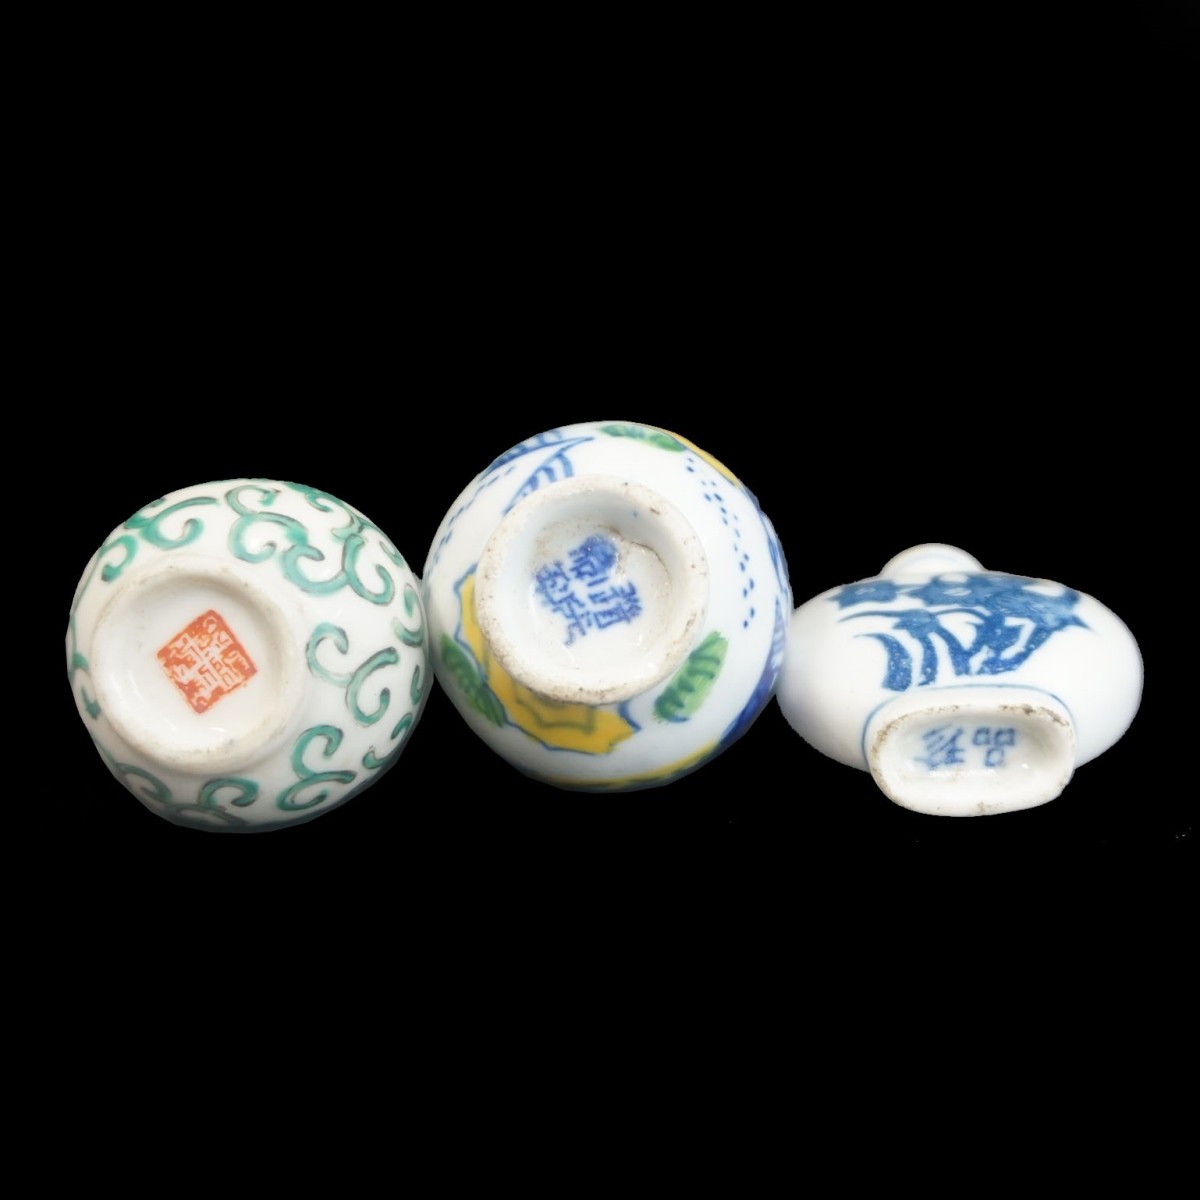 Porcelain Chinese Snuff Bottles